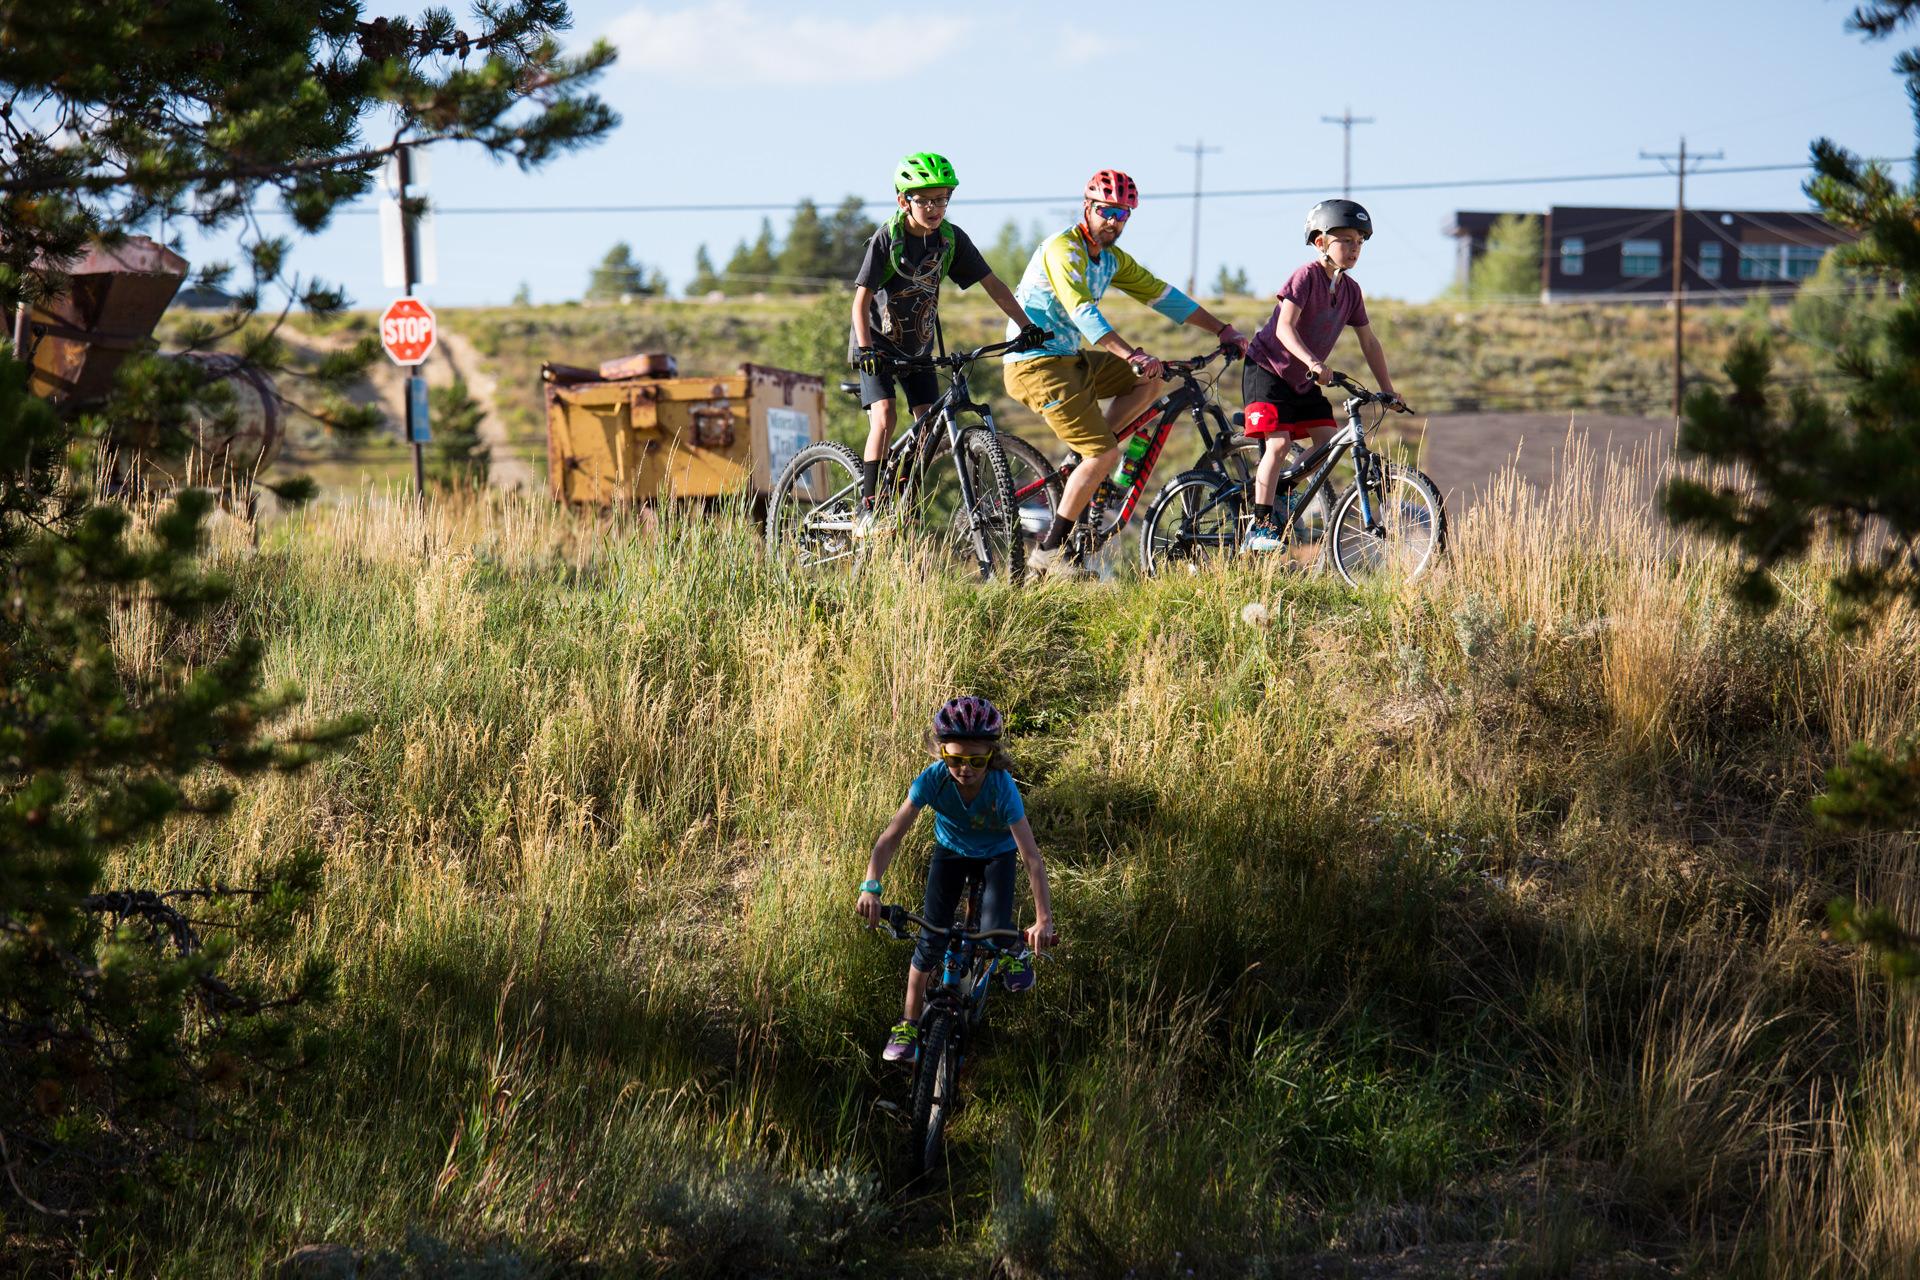 Robert Wood Johnson Foundation - Kids warm up on their bikes before a family trail ride...